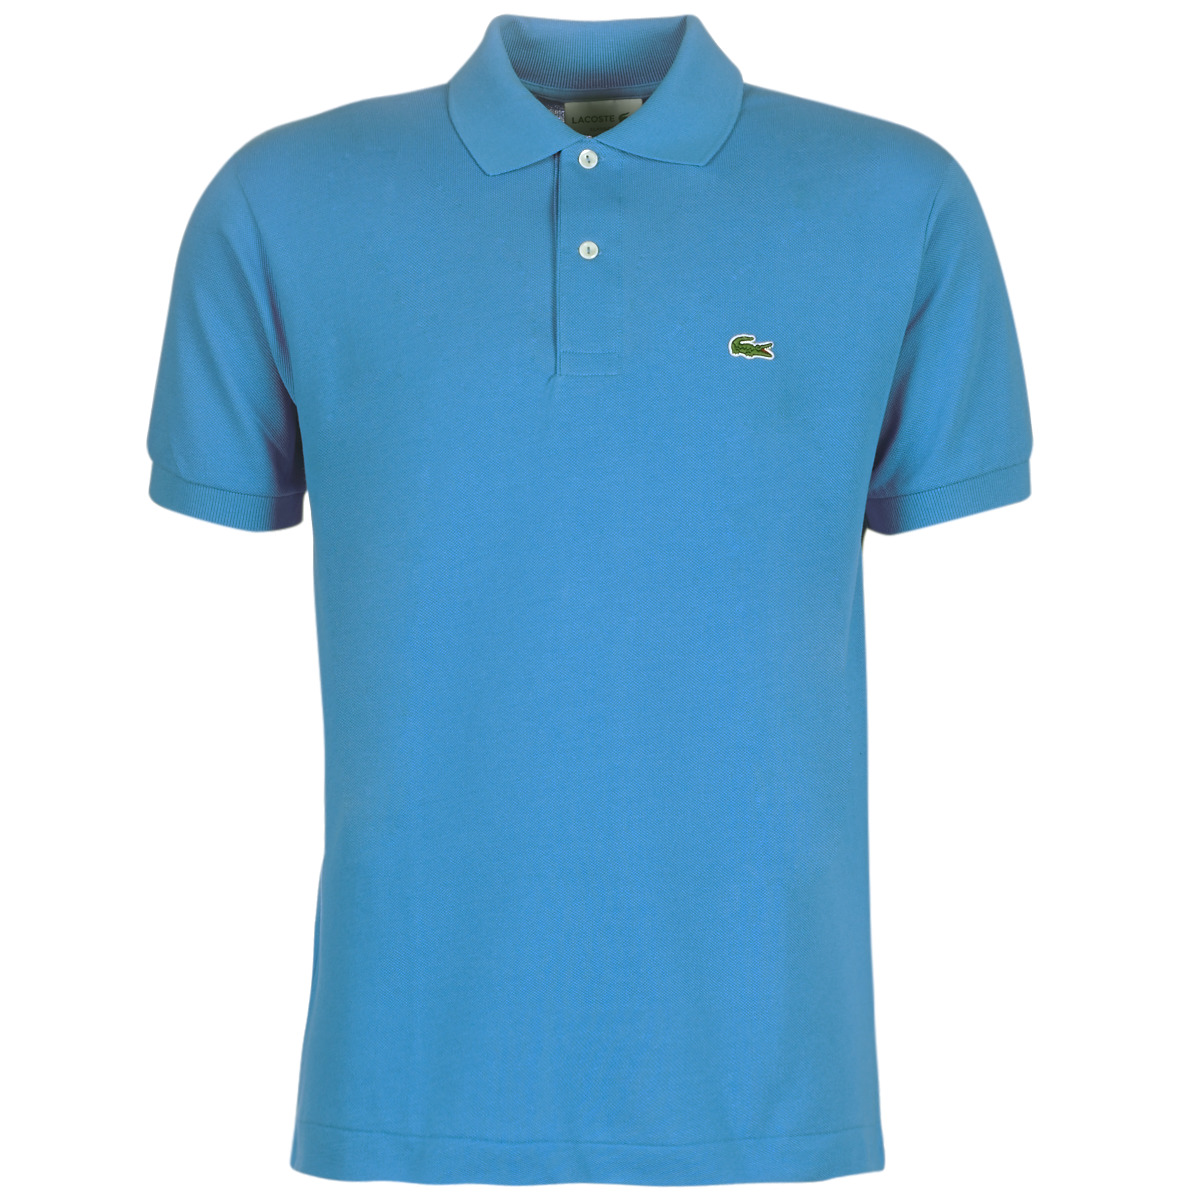 lacoste teal polo